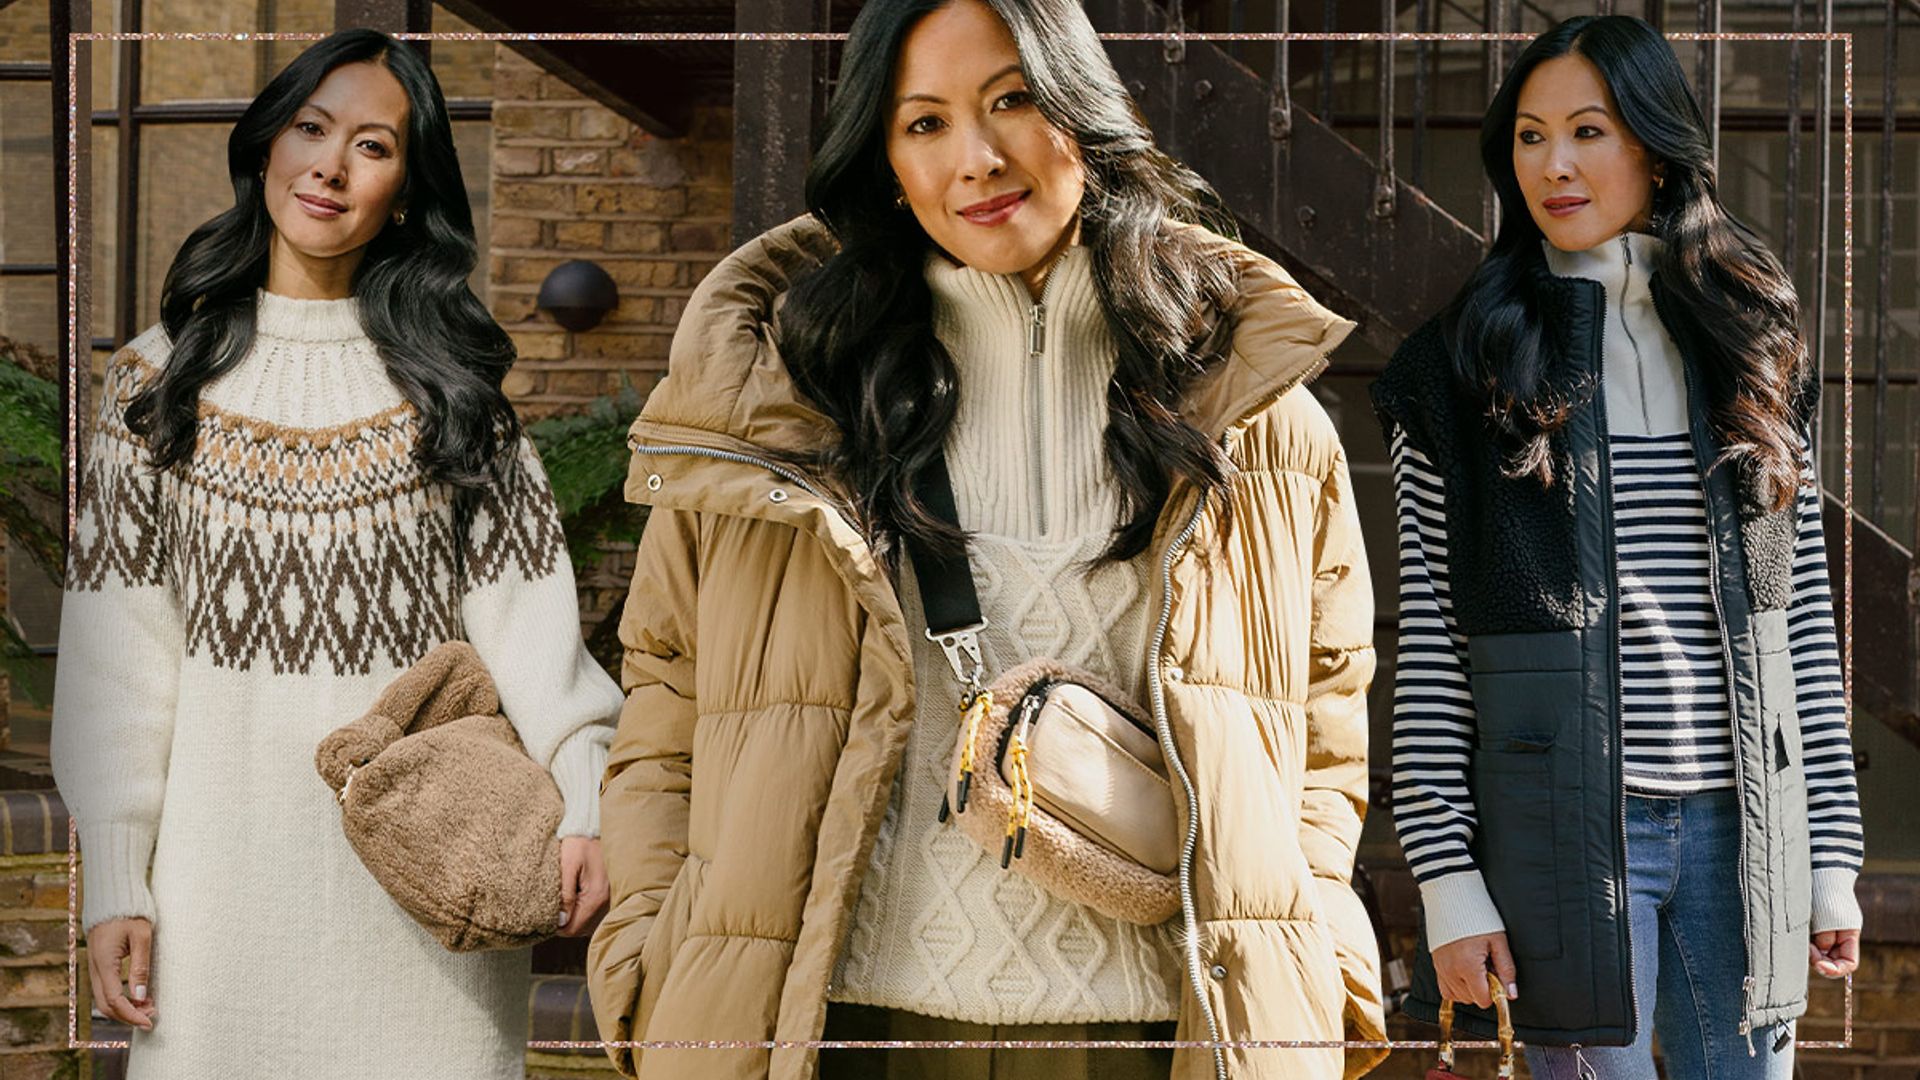 Instagram star Debbie Le aka The Fashionable Pan reveals this year's winter trends